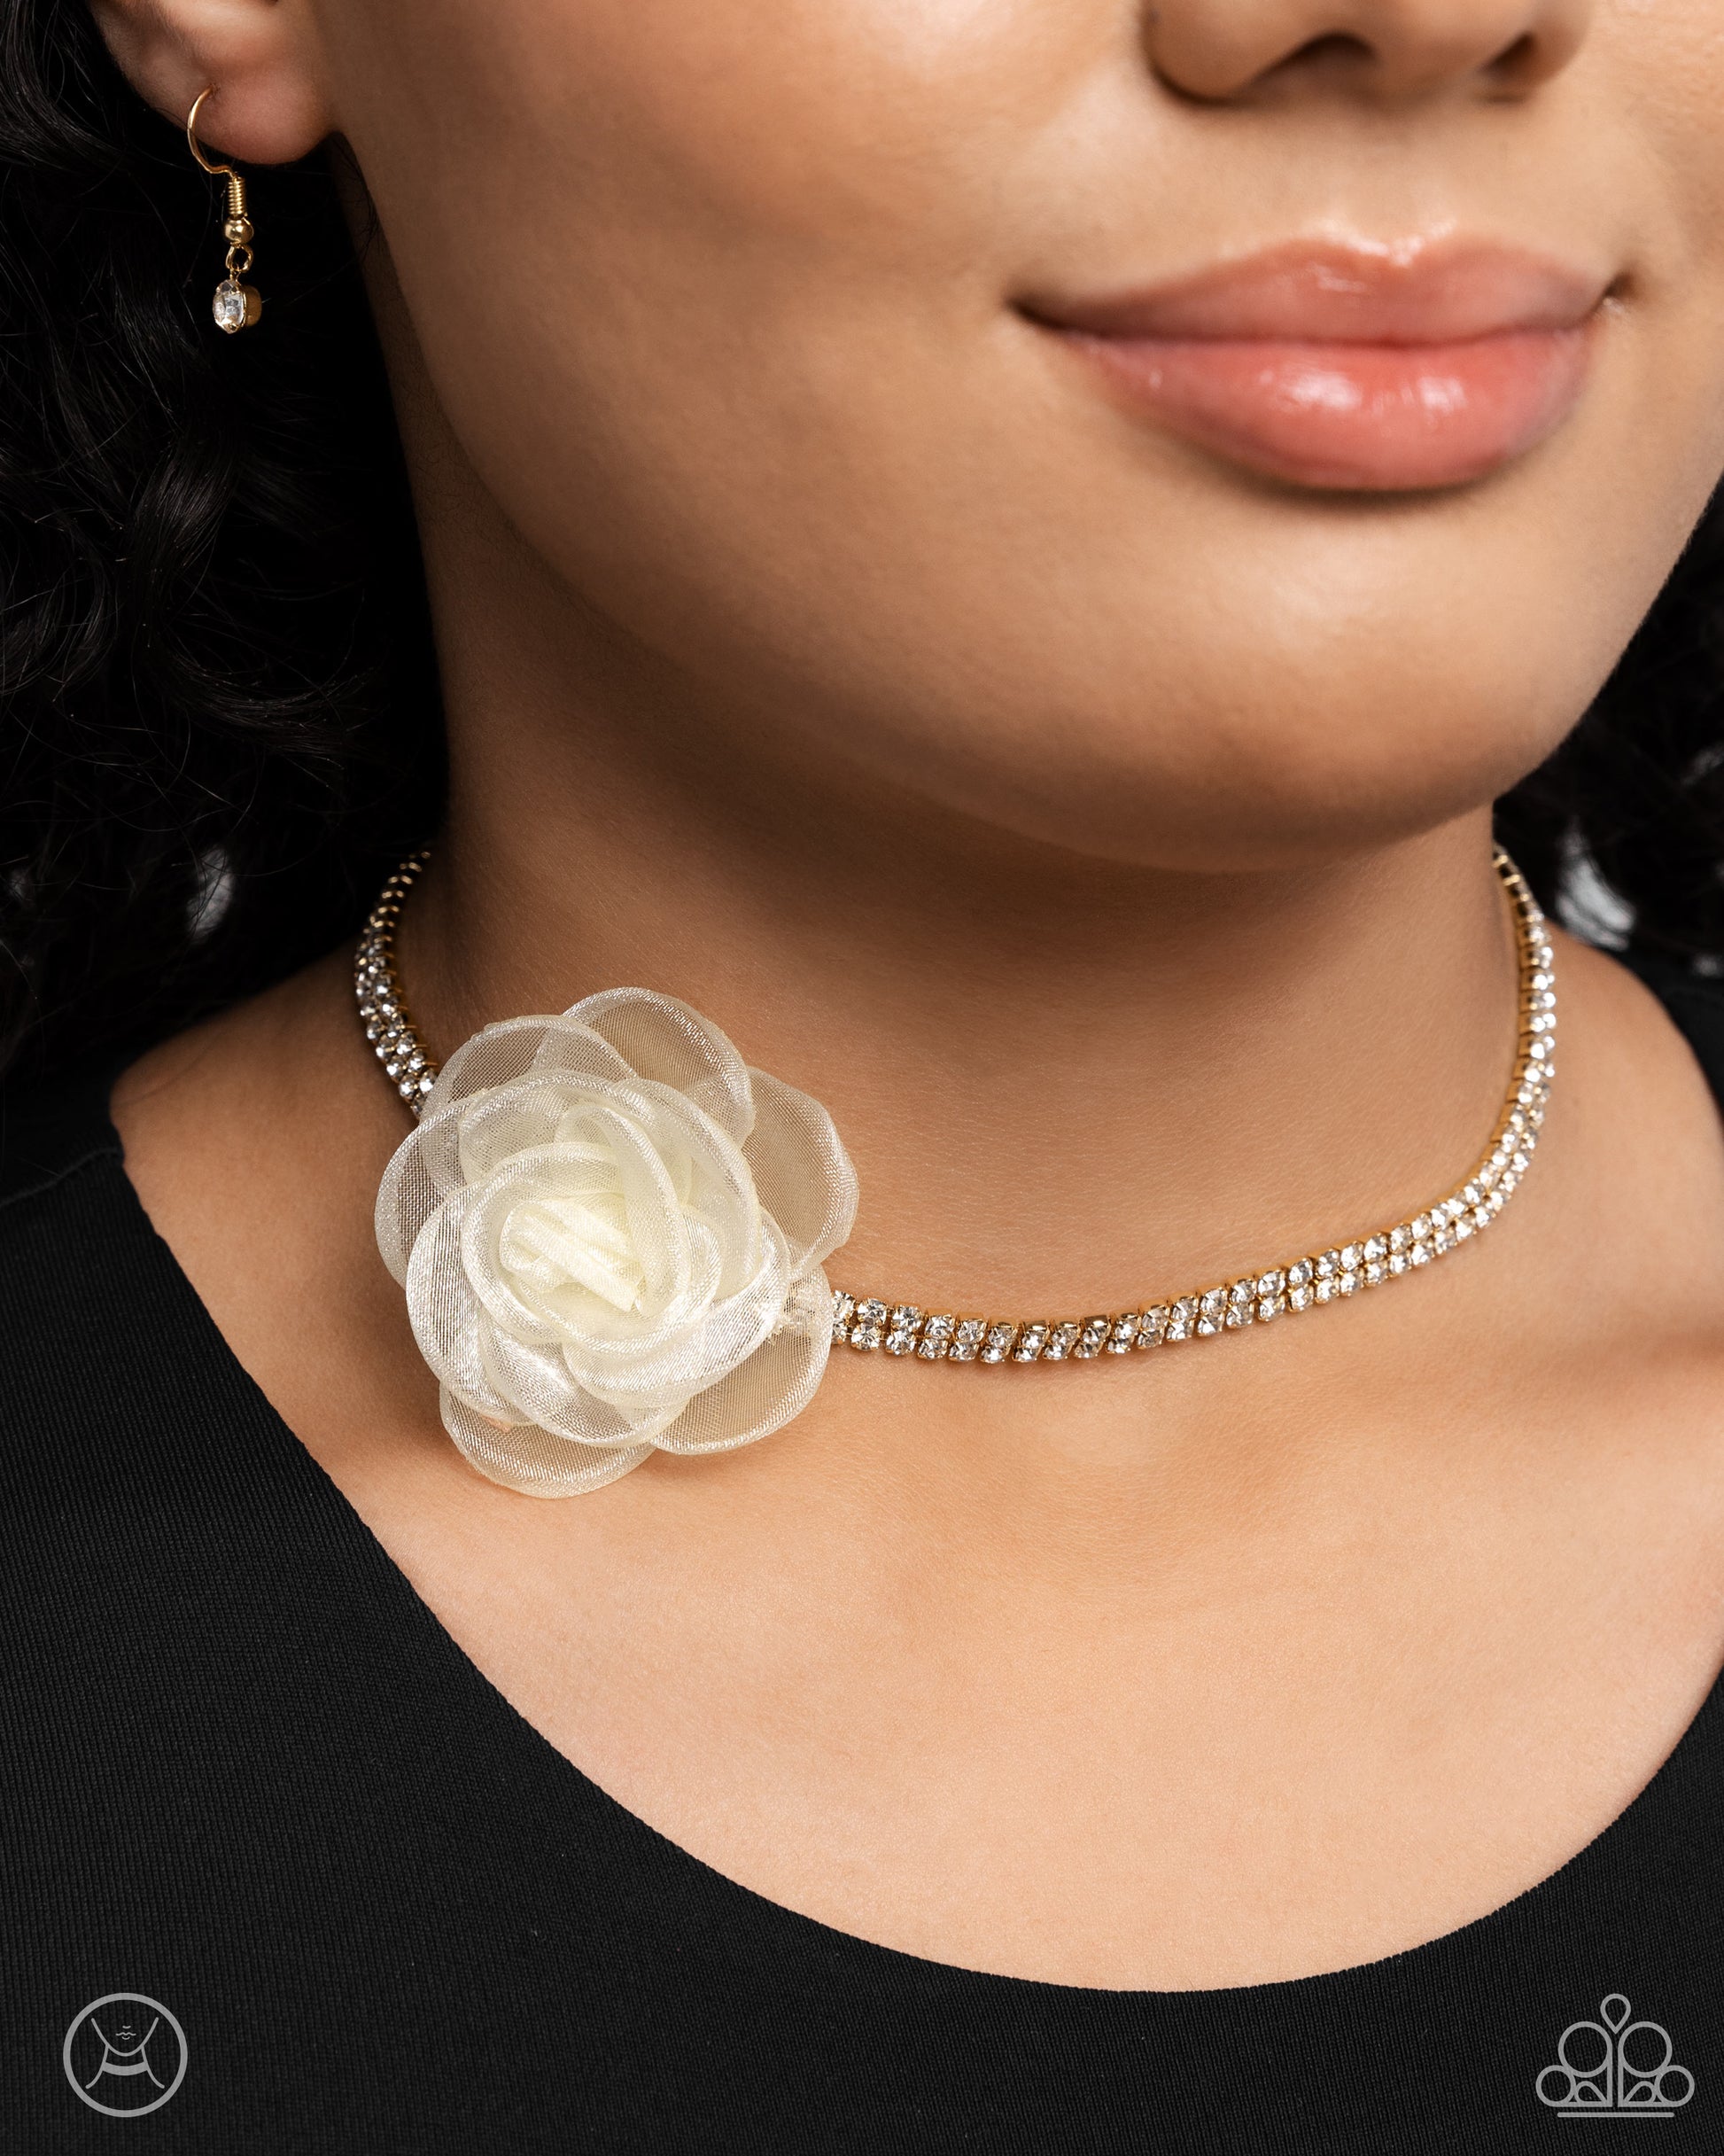 <p>A double-stranded gold chain is embellished with two rows of glistening white rhinestones as it wraps around the collar. An ivory tulle rosette is placed in the center of the design for a floral finish. Features an adjustable clasp closure.</p> <p><i>Sold as one individual choker necklace. Includes one pair of matching earrings. </i></p> &nbsp;<img src="https://d9b54x484lq62.cloudfront.net/paparazzi/shopping/images/517_chokericon_1.jpg" alt="Choker" align="middle" height="50" width="50">